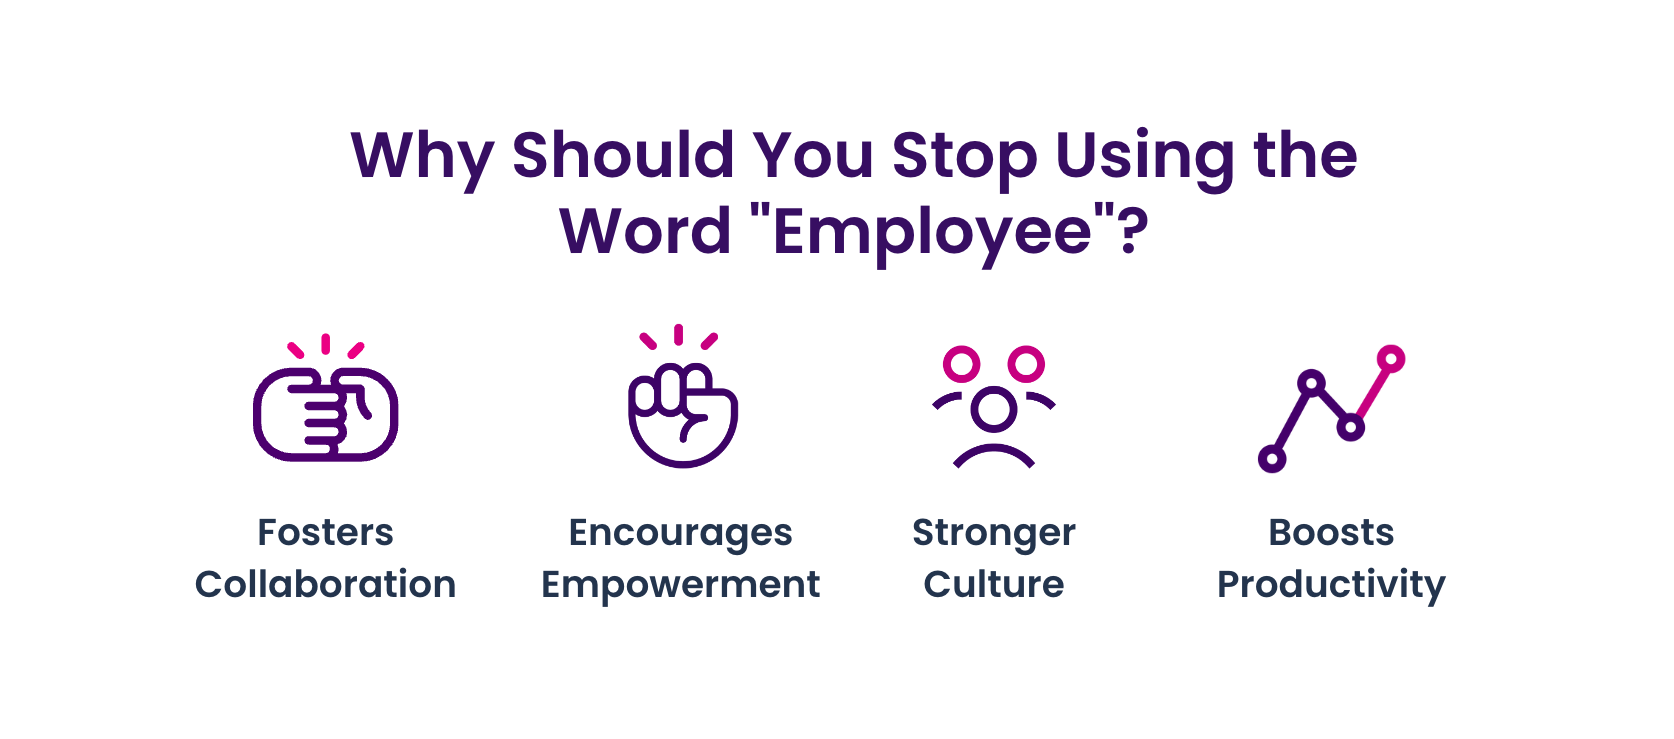 Why Should You Stop Using the Word Employee